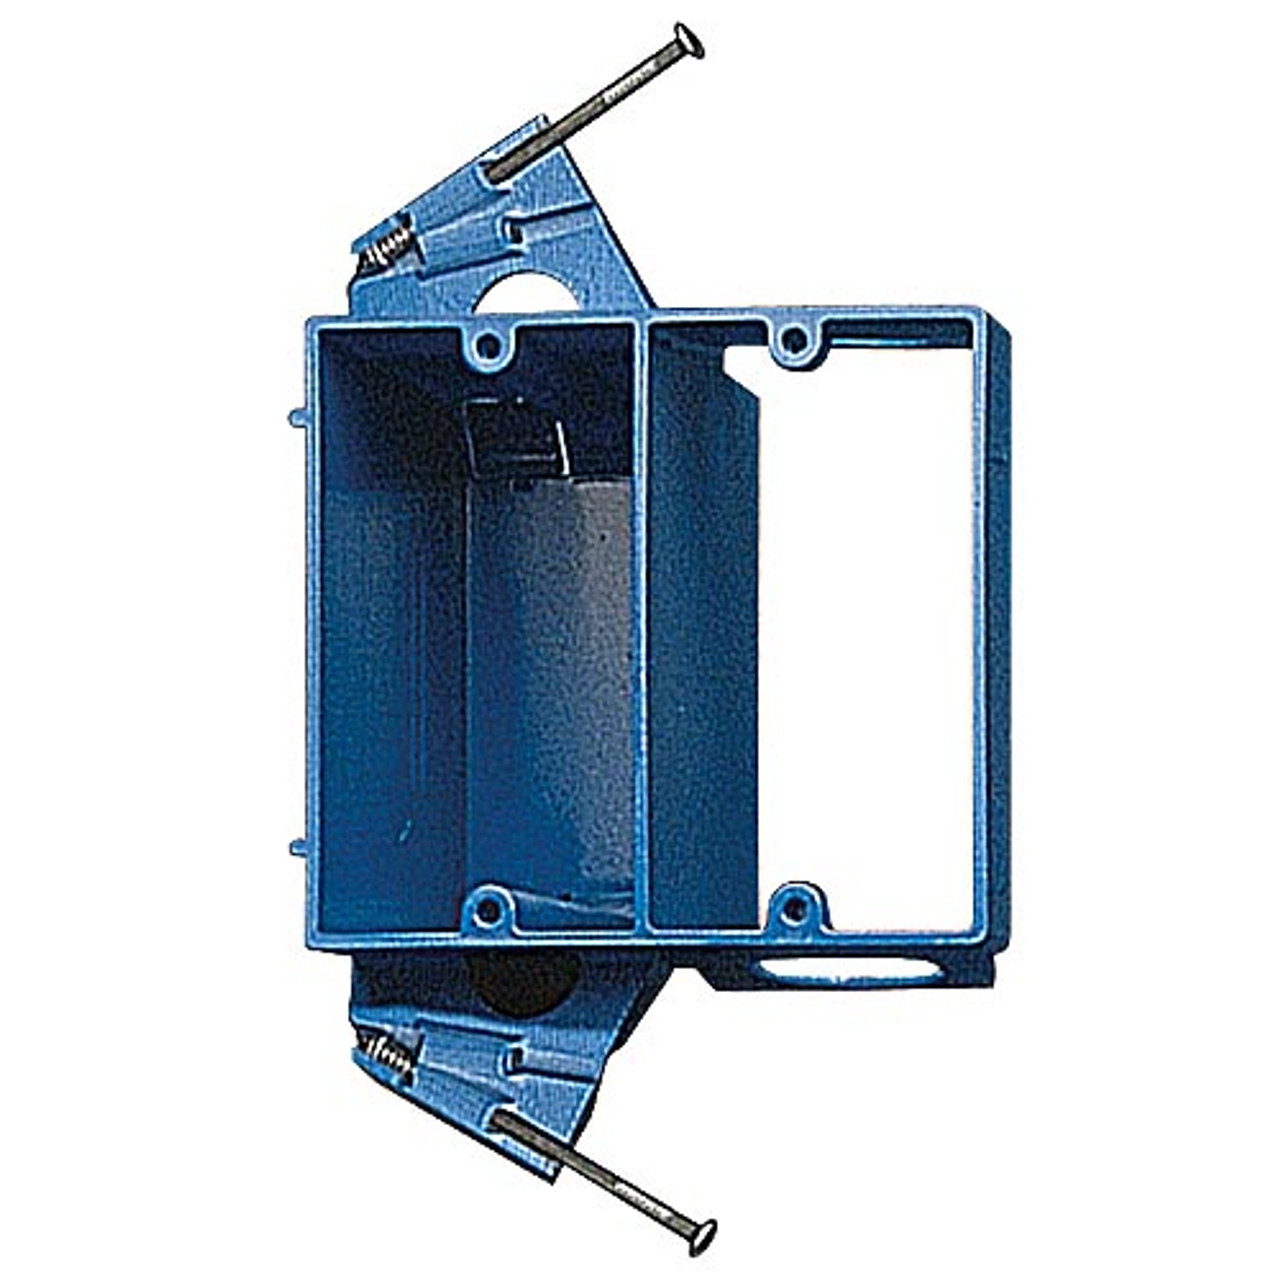 T&B SC200DV - Dual Voltage Outlet Box and Bracket